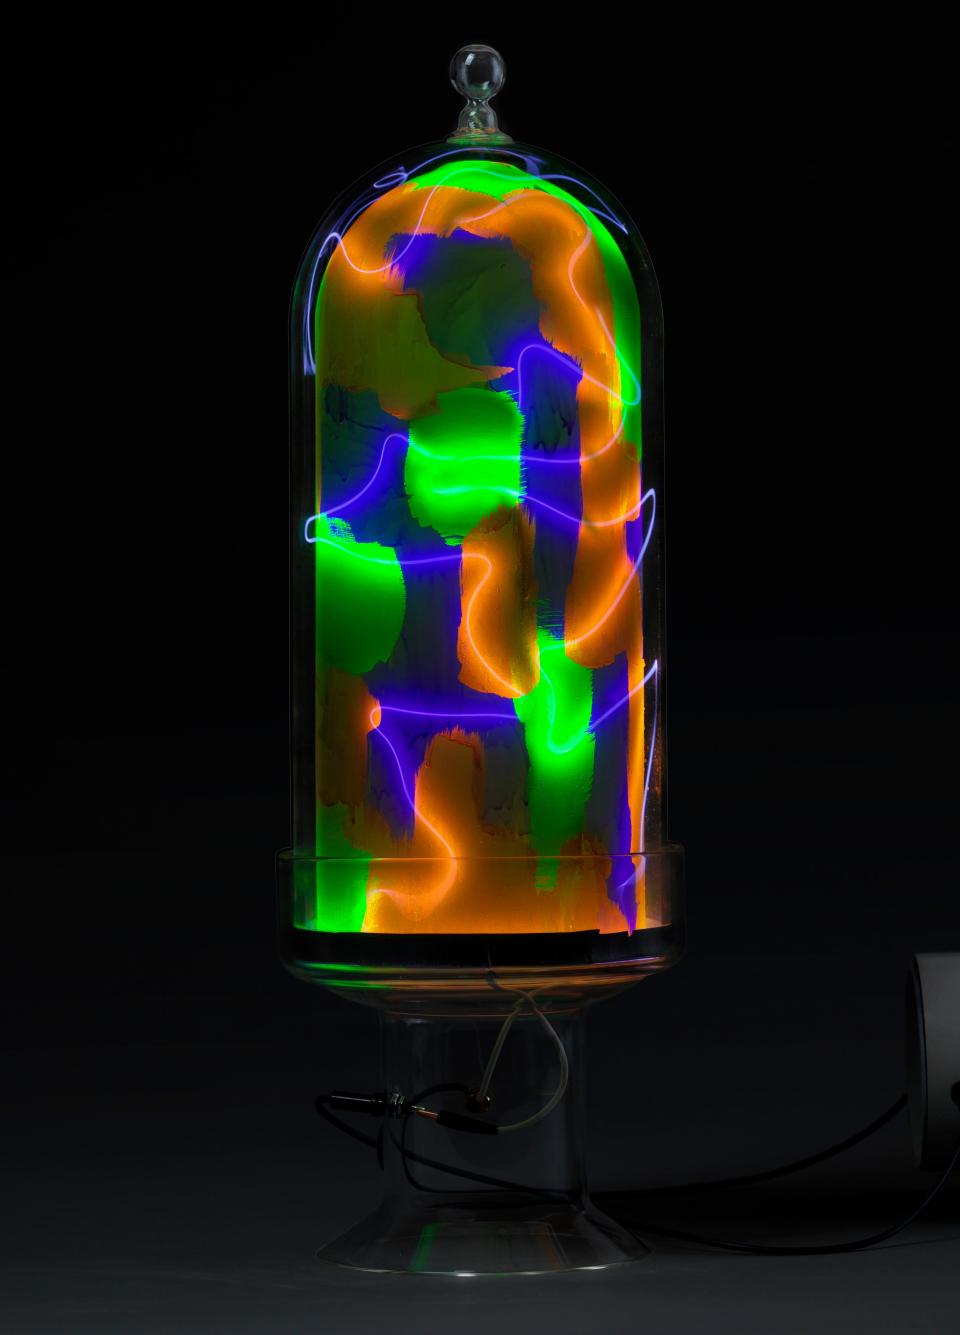 Wayne Strattman's sculptures draw on his background in engineering and studies in the field of neon.